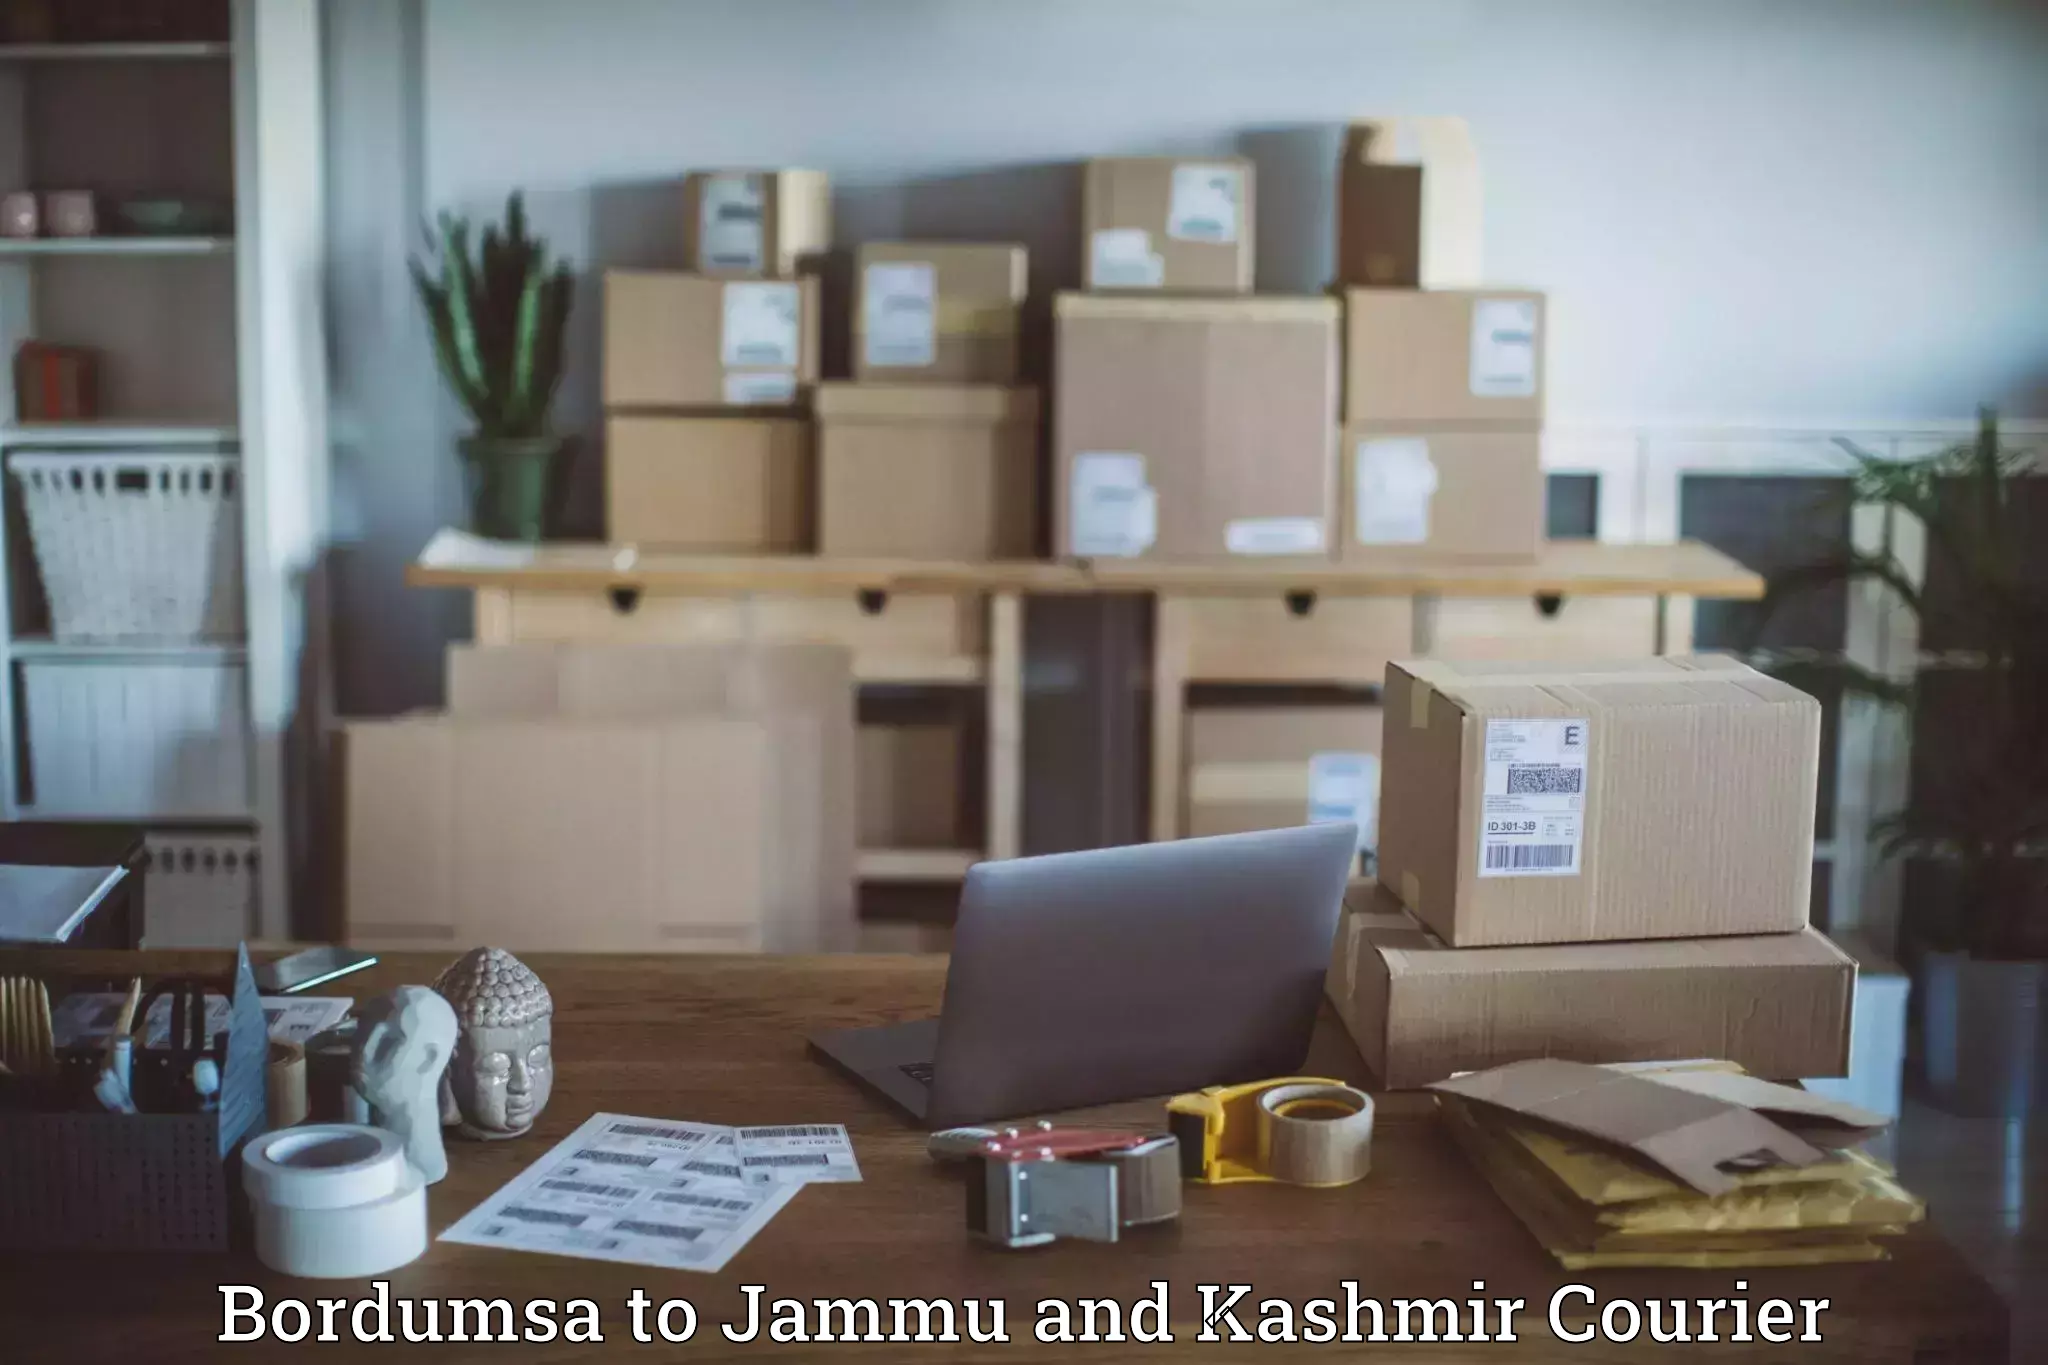 Nationwide delivery network Bordumsa to Jammu and Kashmir